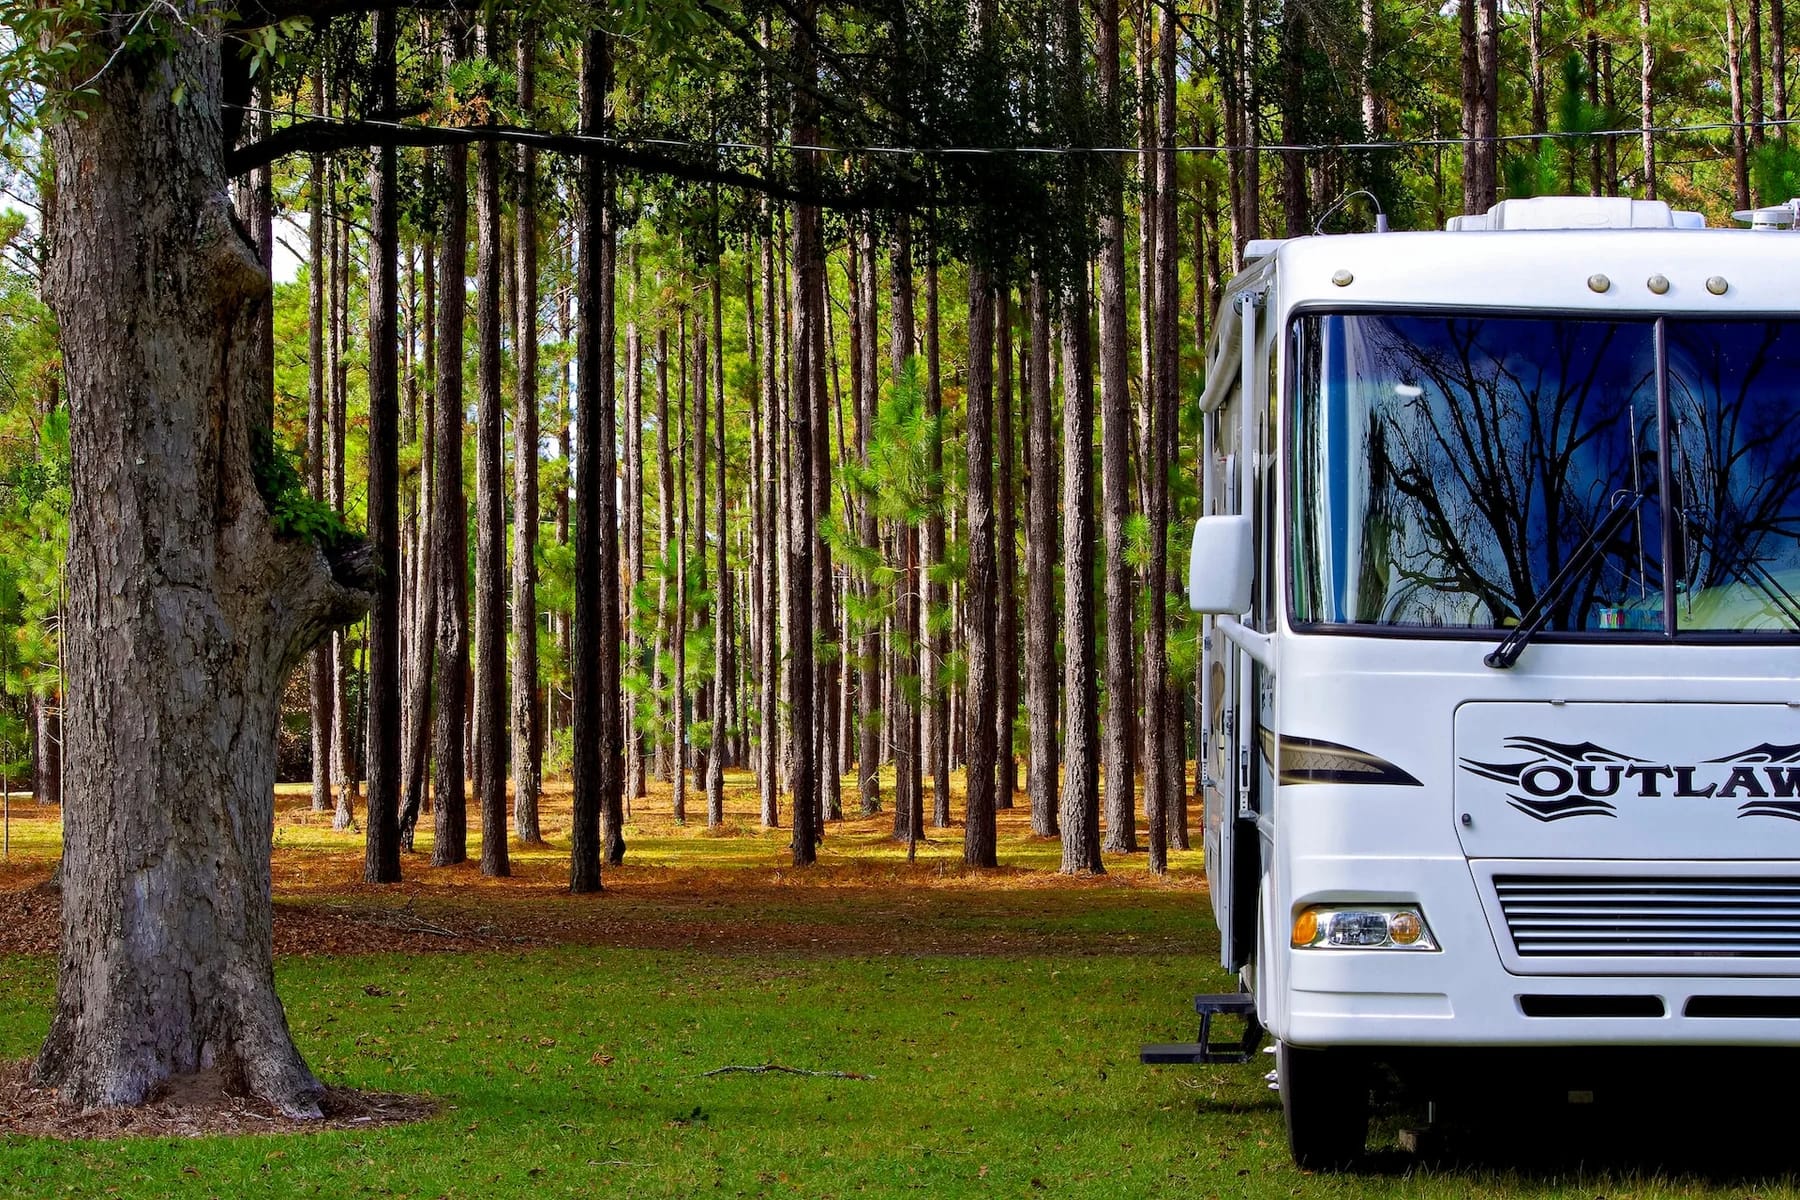 Image of a parked RV to convey storing your RV trees